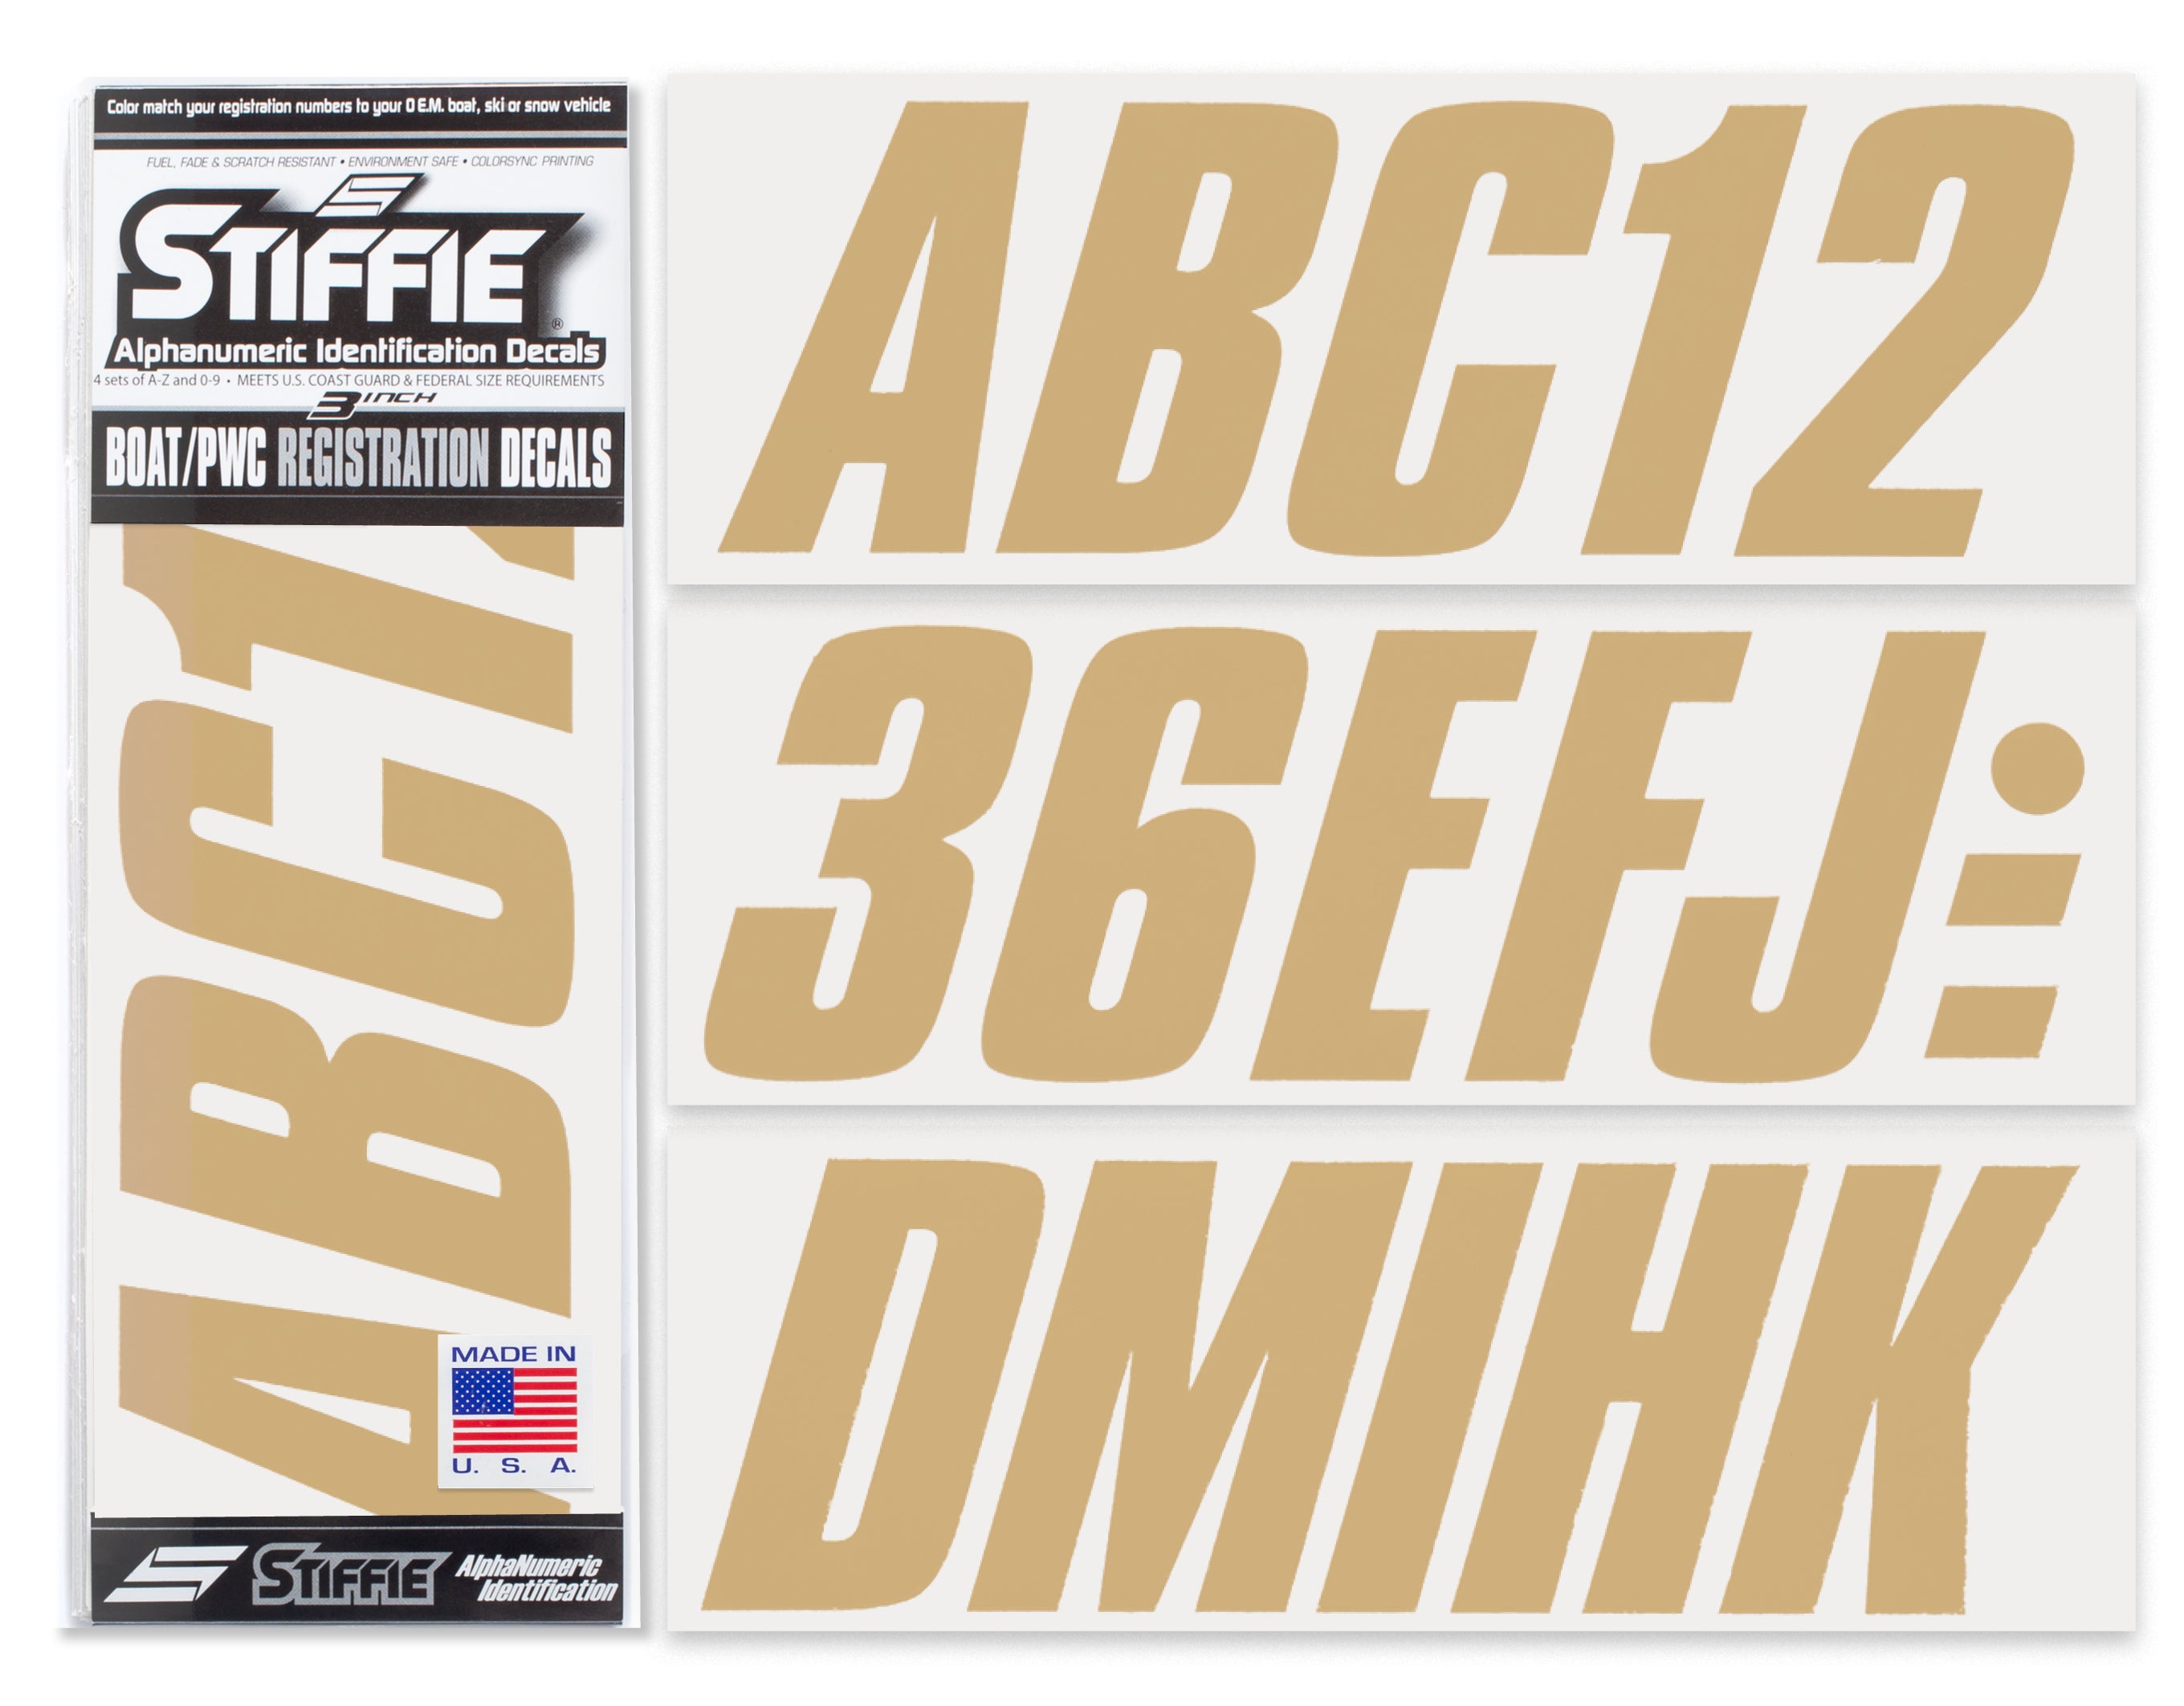 STIFFIE Shift Tan 3" ID Kit Alpha-Numeric Registration Identification Numbers Stickers Decals for Boats & Personal Watercraft